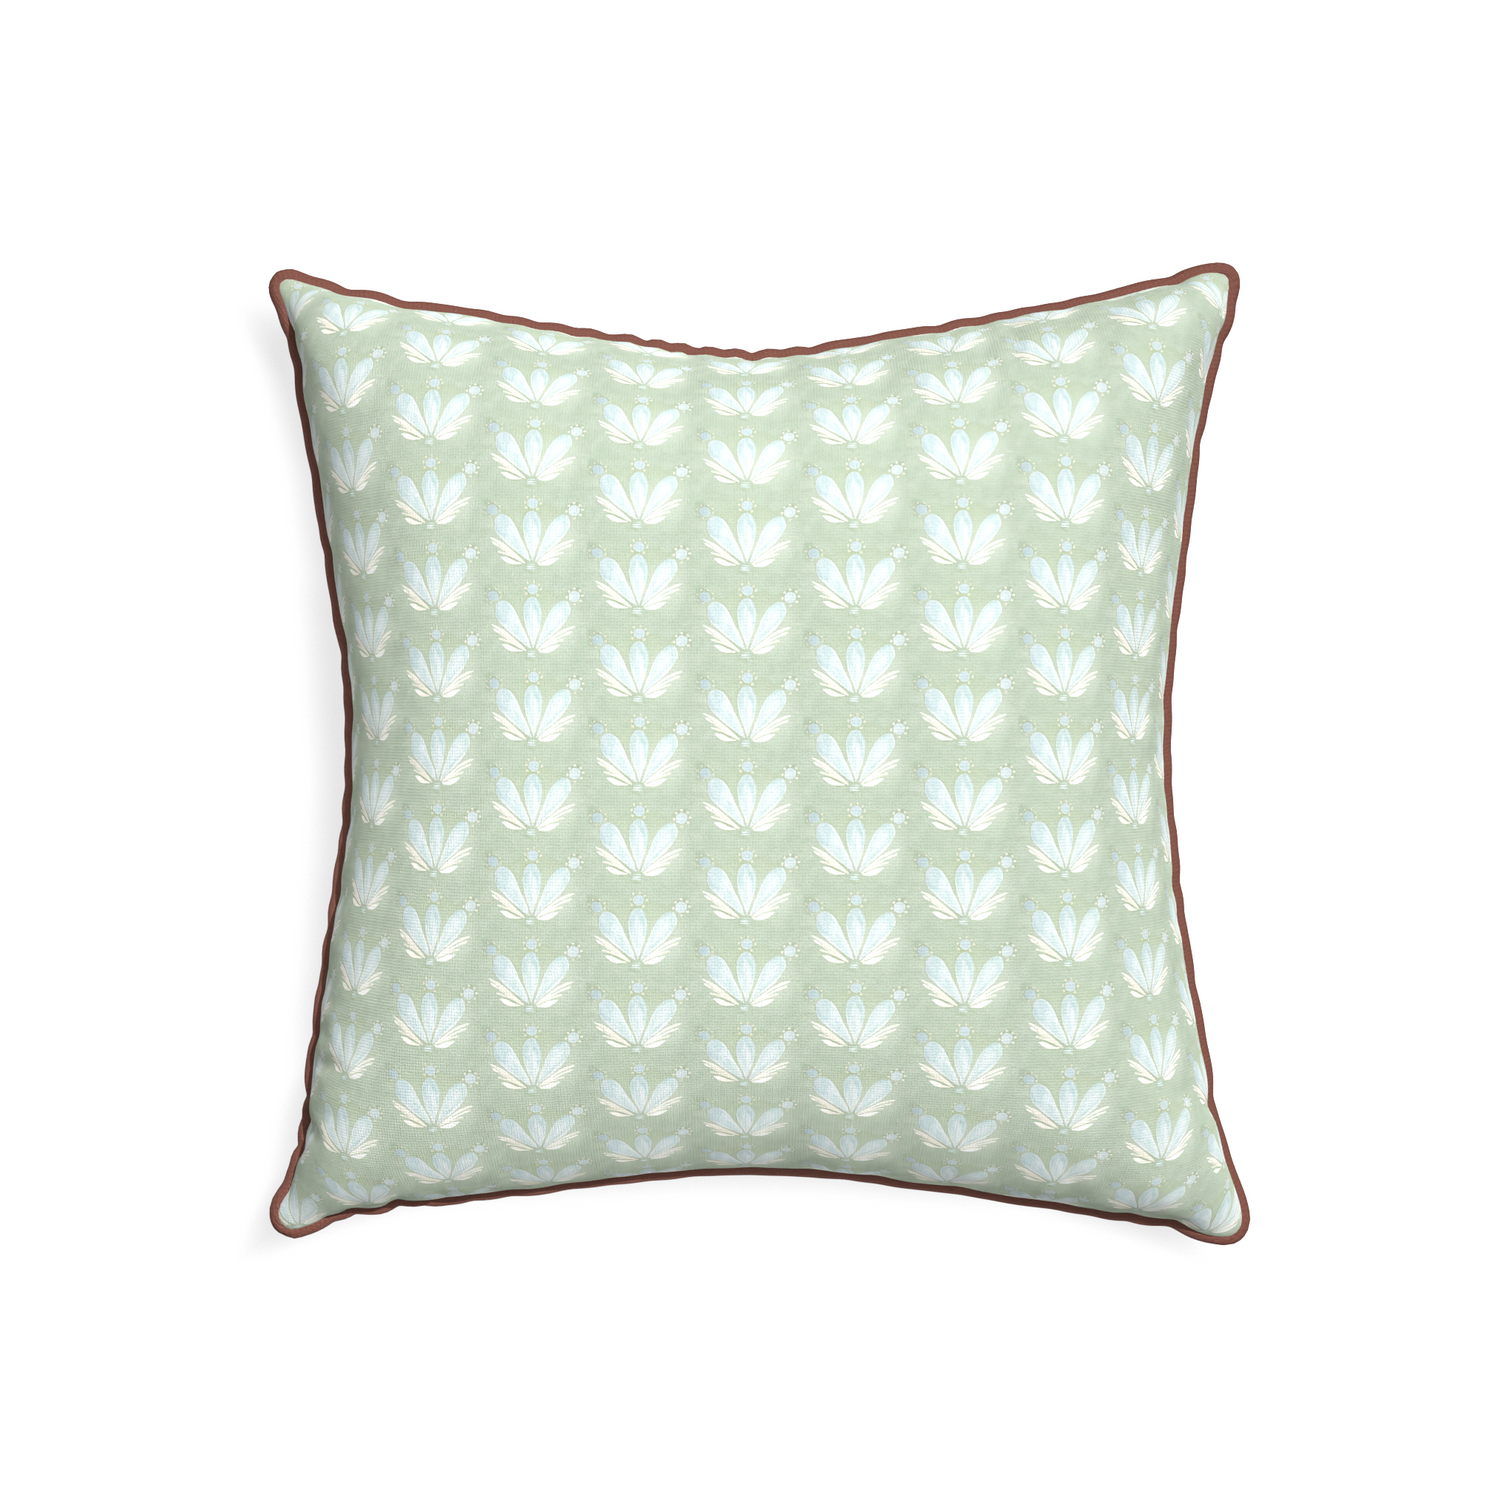 22-square serena sea salt custom blue & green floral drop repeatpillow with w piping on white background